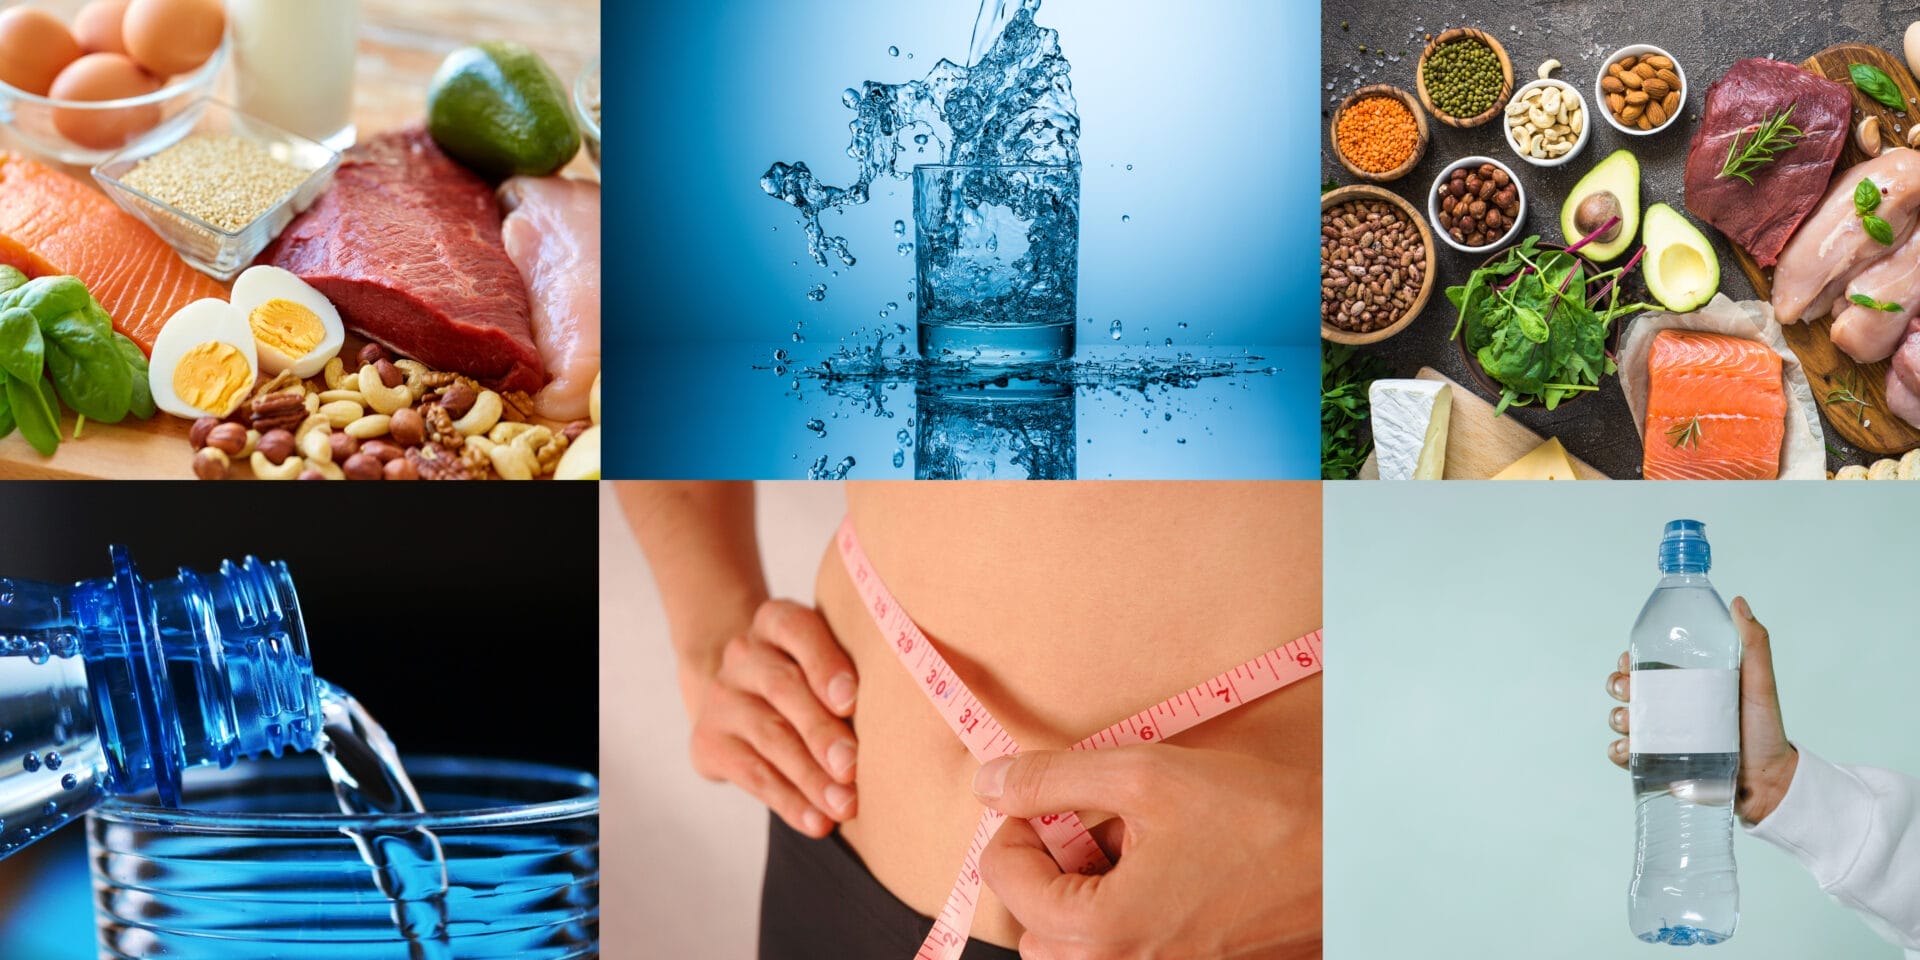 Prioritize water consumption and protein for each meal to lose pesky body fat.